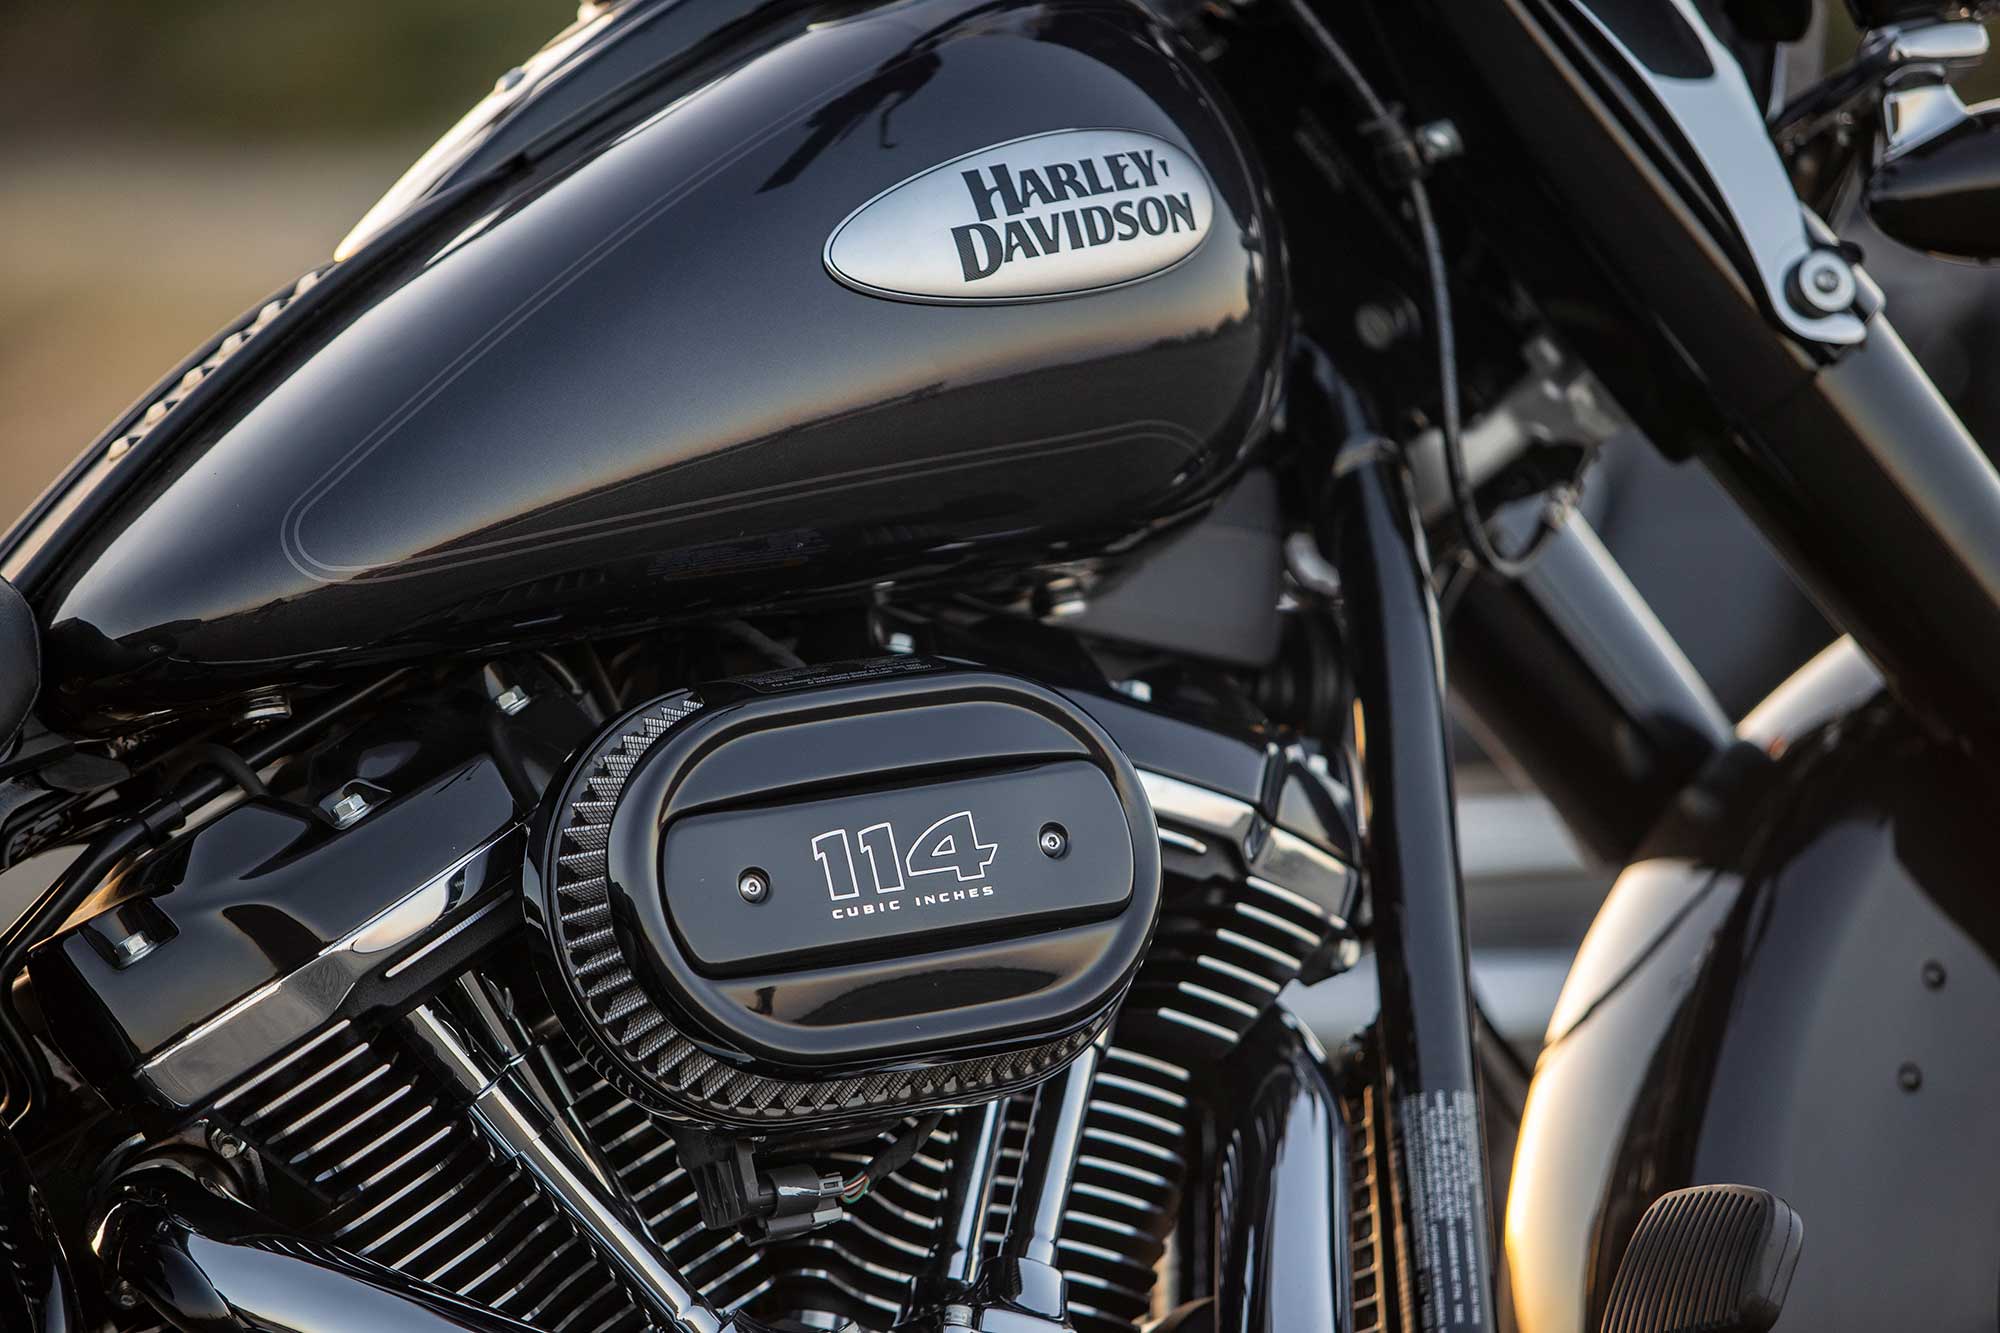 2022 Harley Davidson Heritage Classic [Specs, Features, Photos]